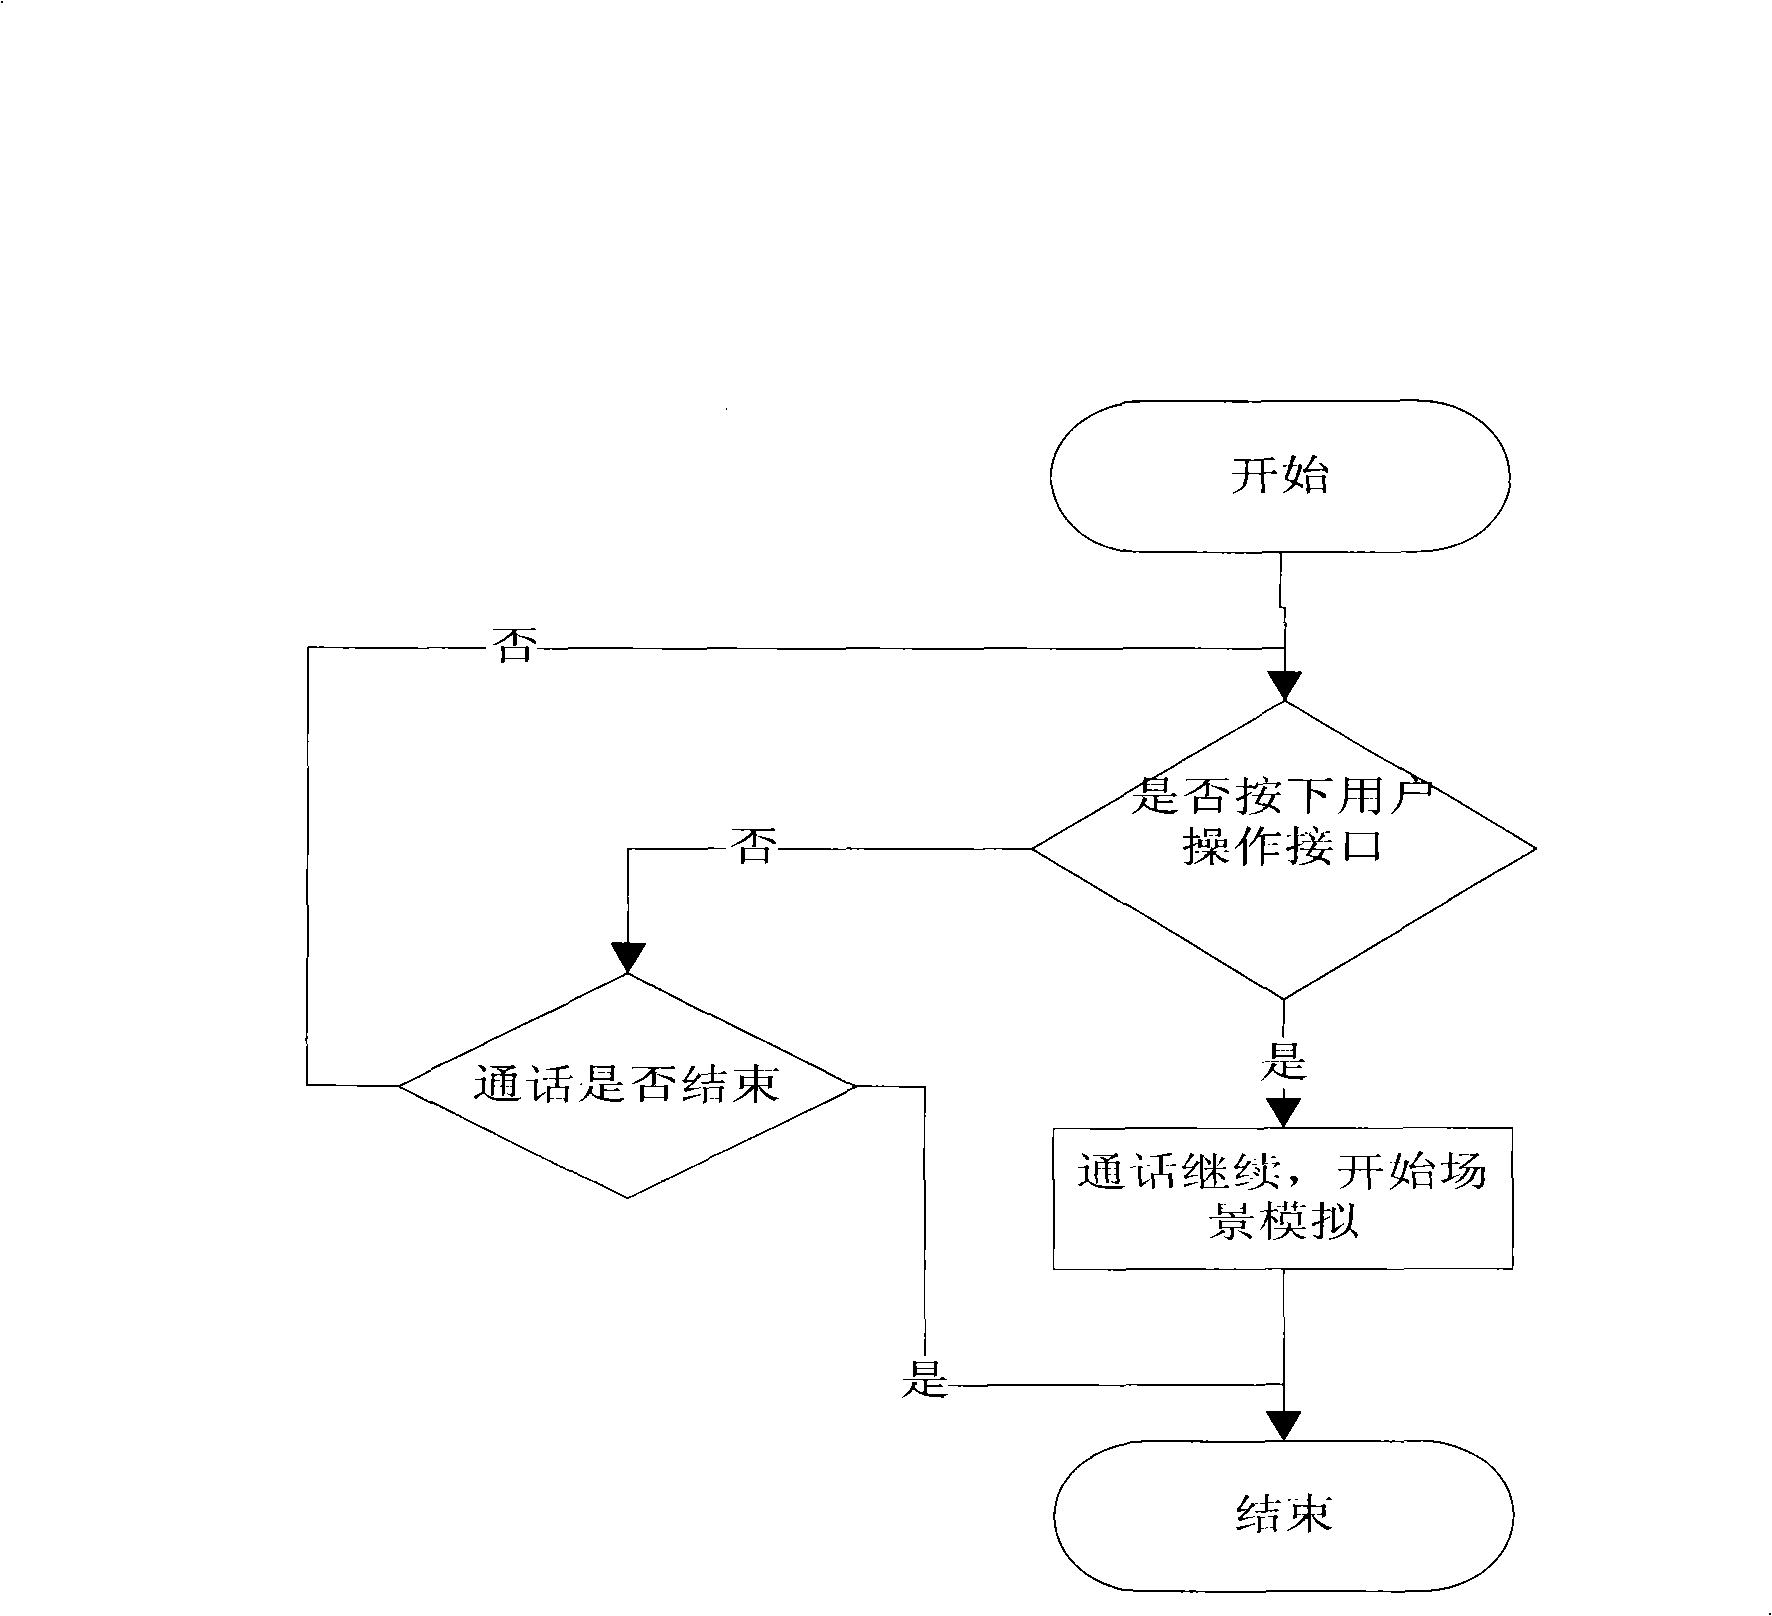 Method for simulating talking scene of mobile phone visible telephone